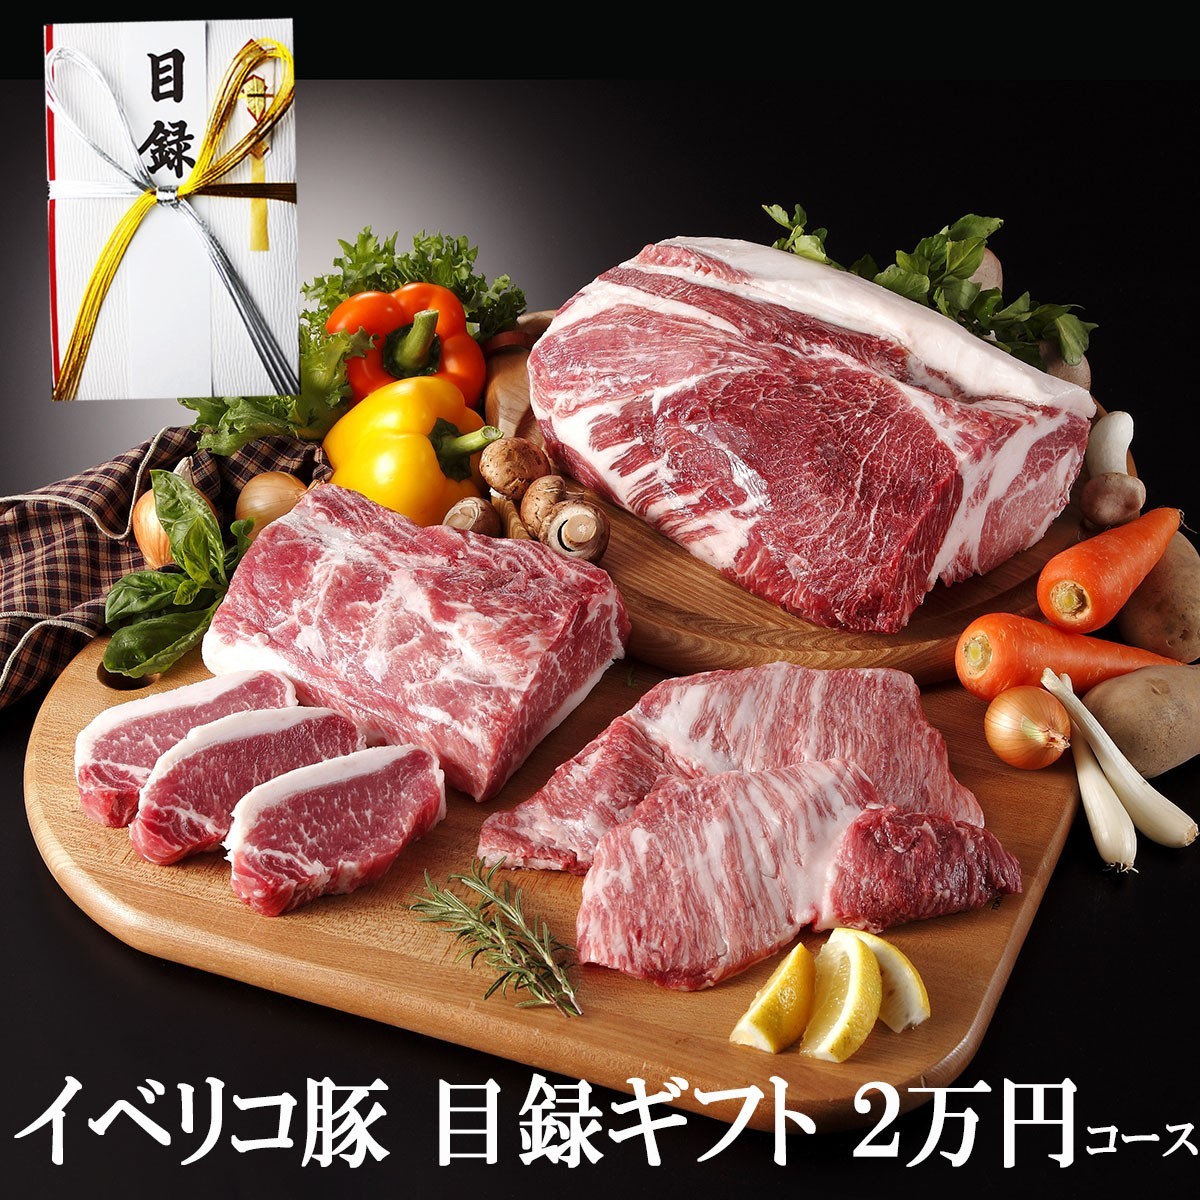 ibe Rico pig list gift set 2 ten thousand jpy course gift Golf competition Event wedding 2 next .. meat pork 